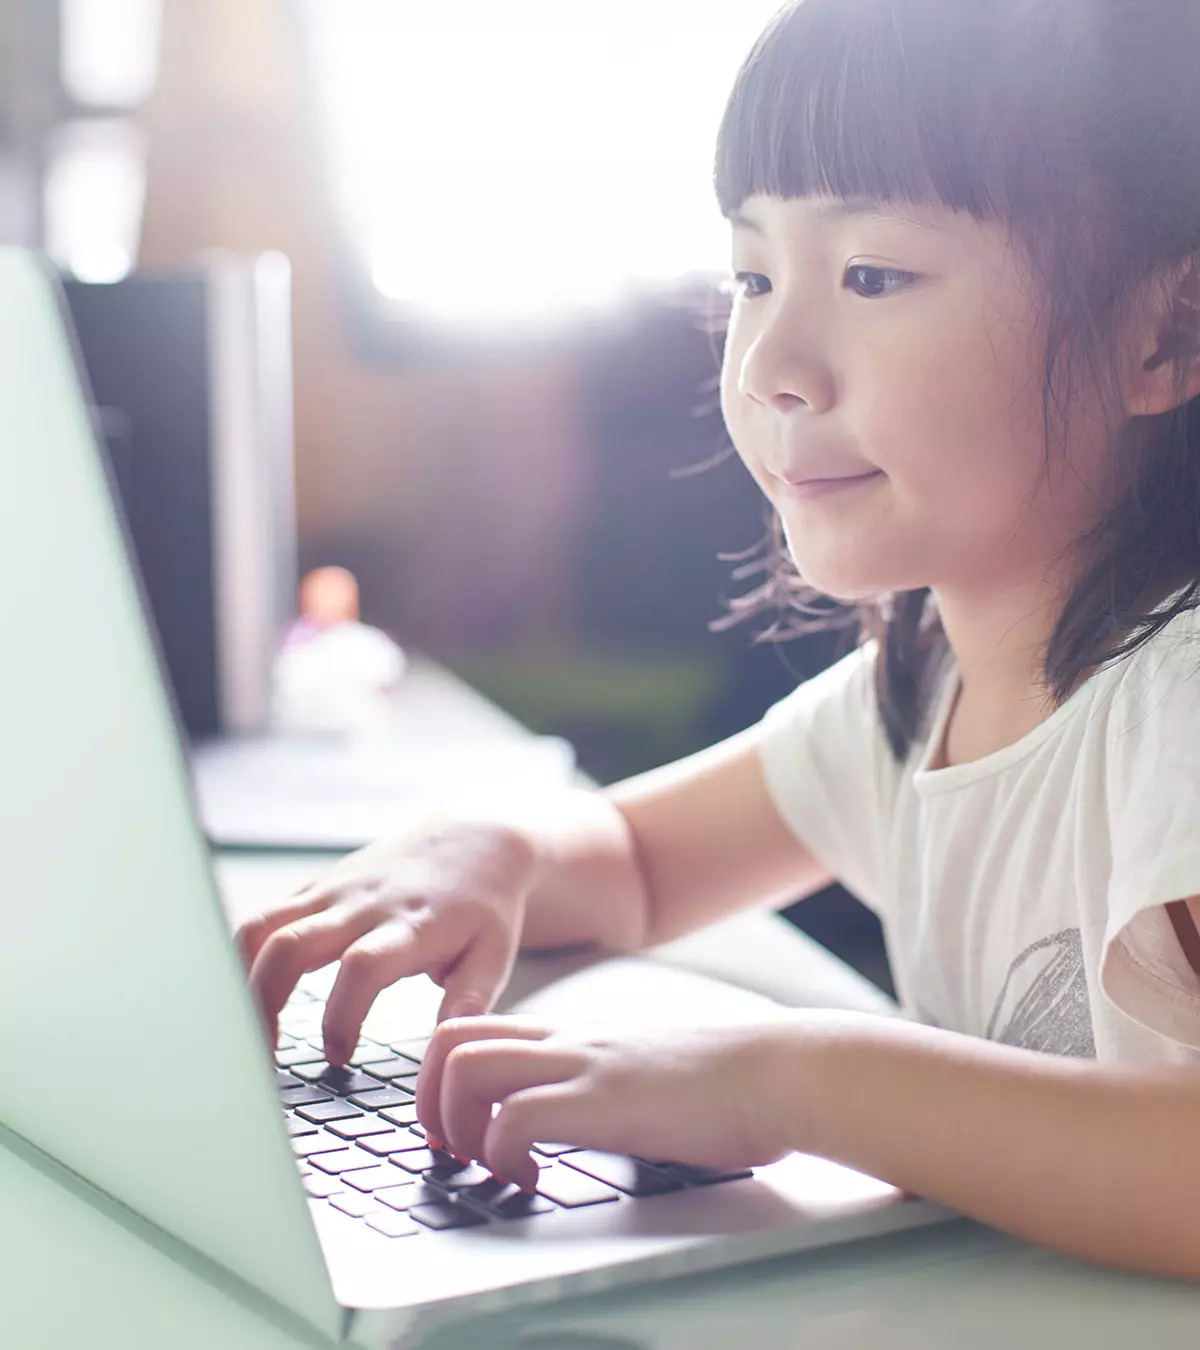 15 Fun And Free Online Games For Kids To Play In 2023